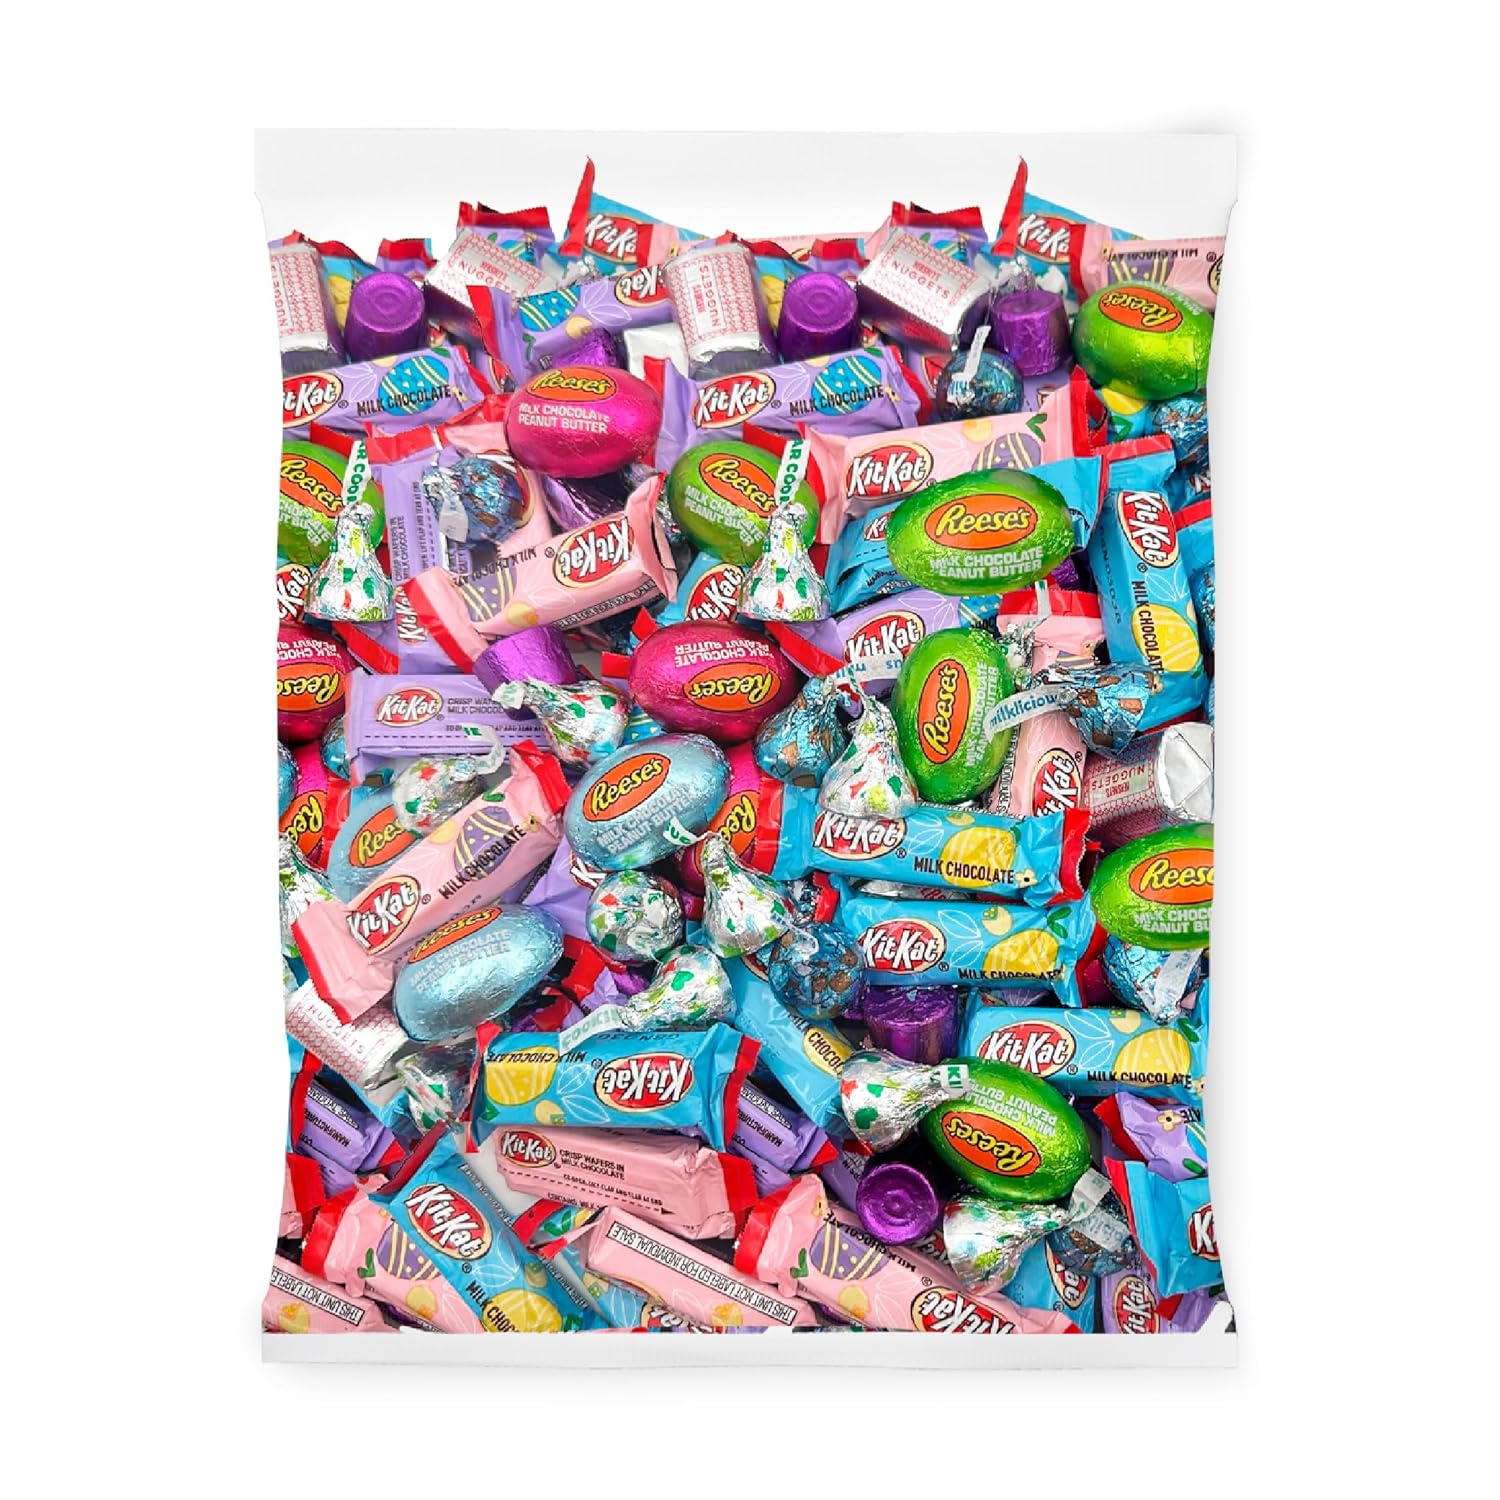 Chocolate Easter Candy Mix - HERSHEY'S KISSES, Peanut Butter Eggs, KITKAT Bars, ROLO, 3-Pound Variety Bag (About 150 Pieces)